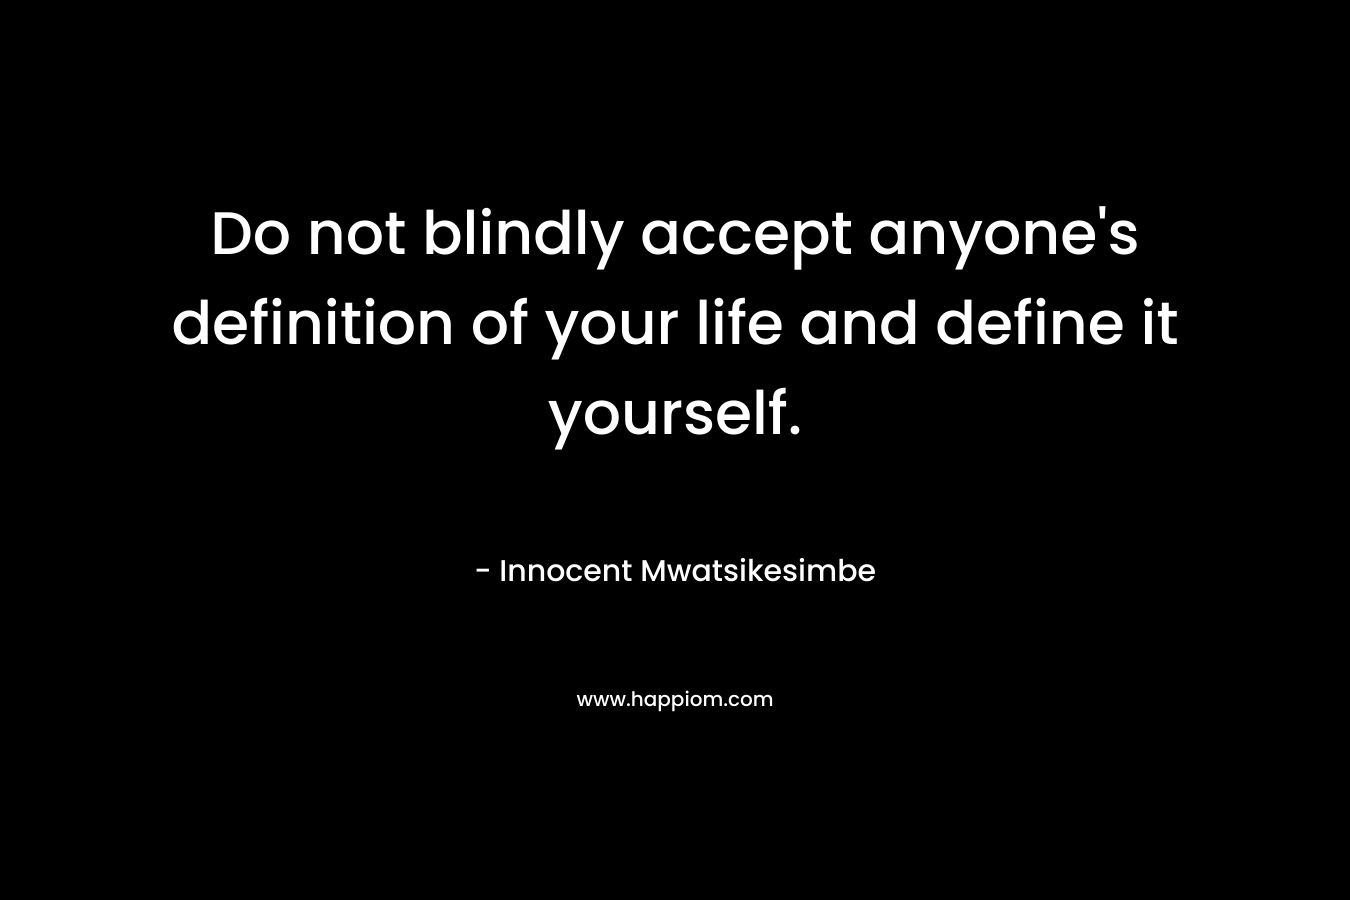 Do not blindly accept anyone's definition of your life and define it yourself.